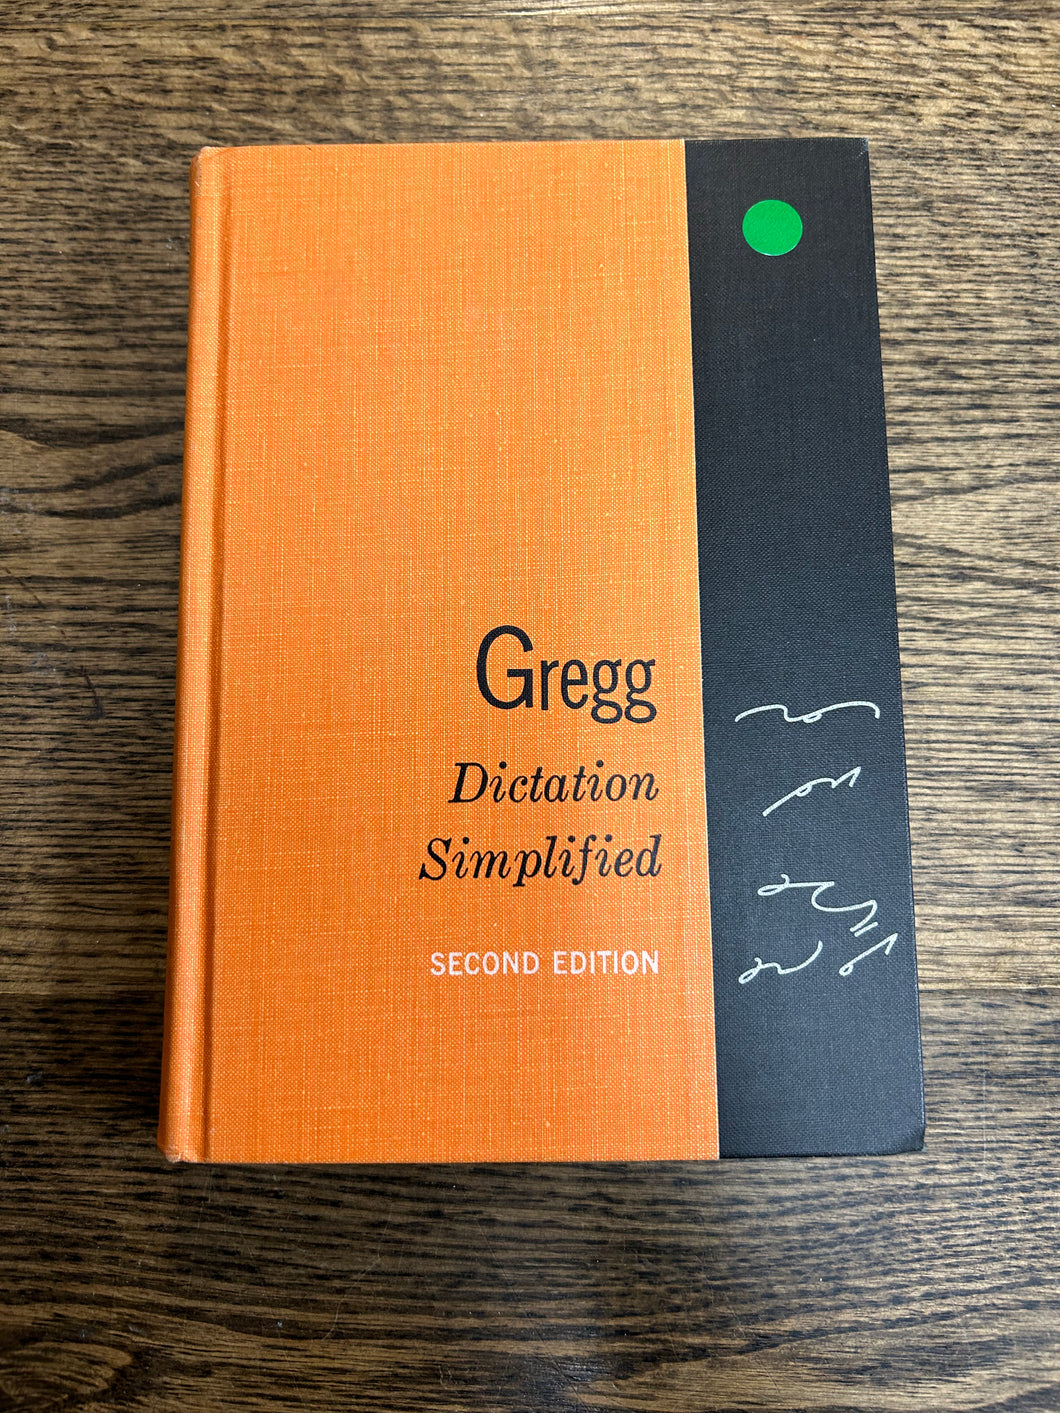 Gregg Dictation Simplified Second Edition